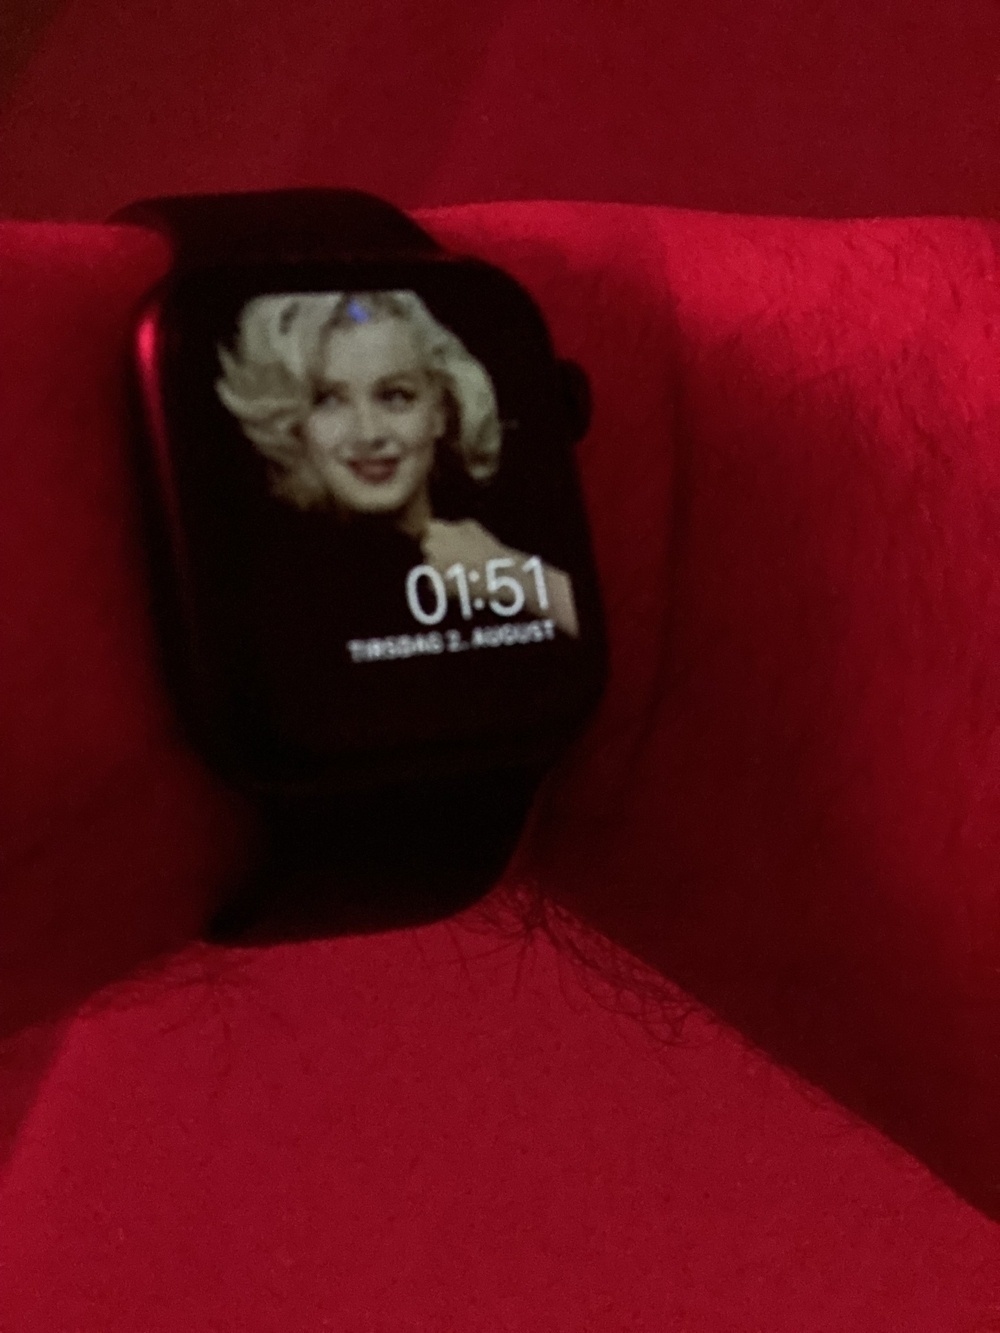 Apple Watch on my wrist, with a picture of Marilyn Monroe on the watch face.